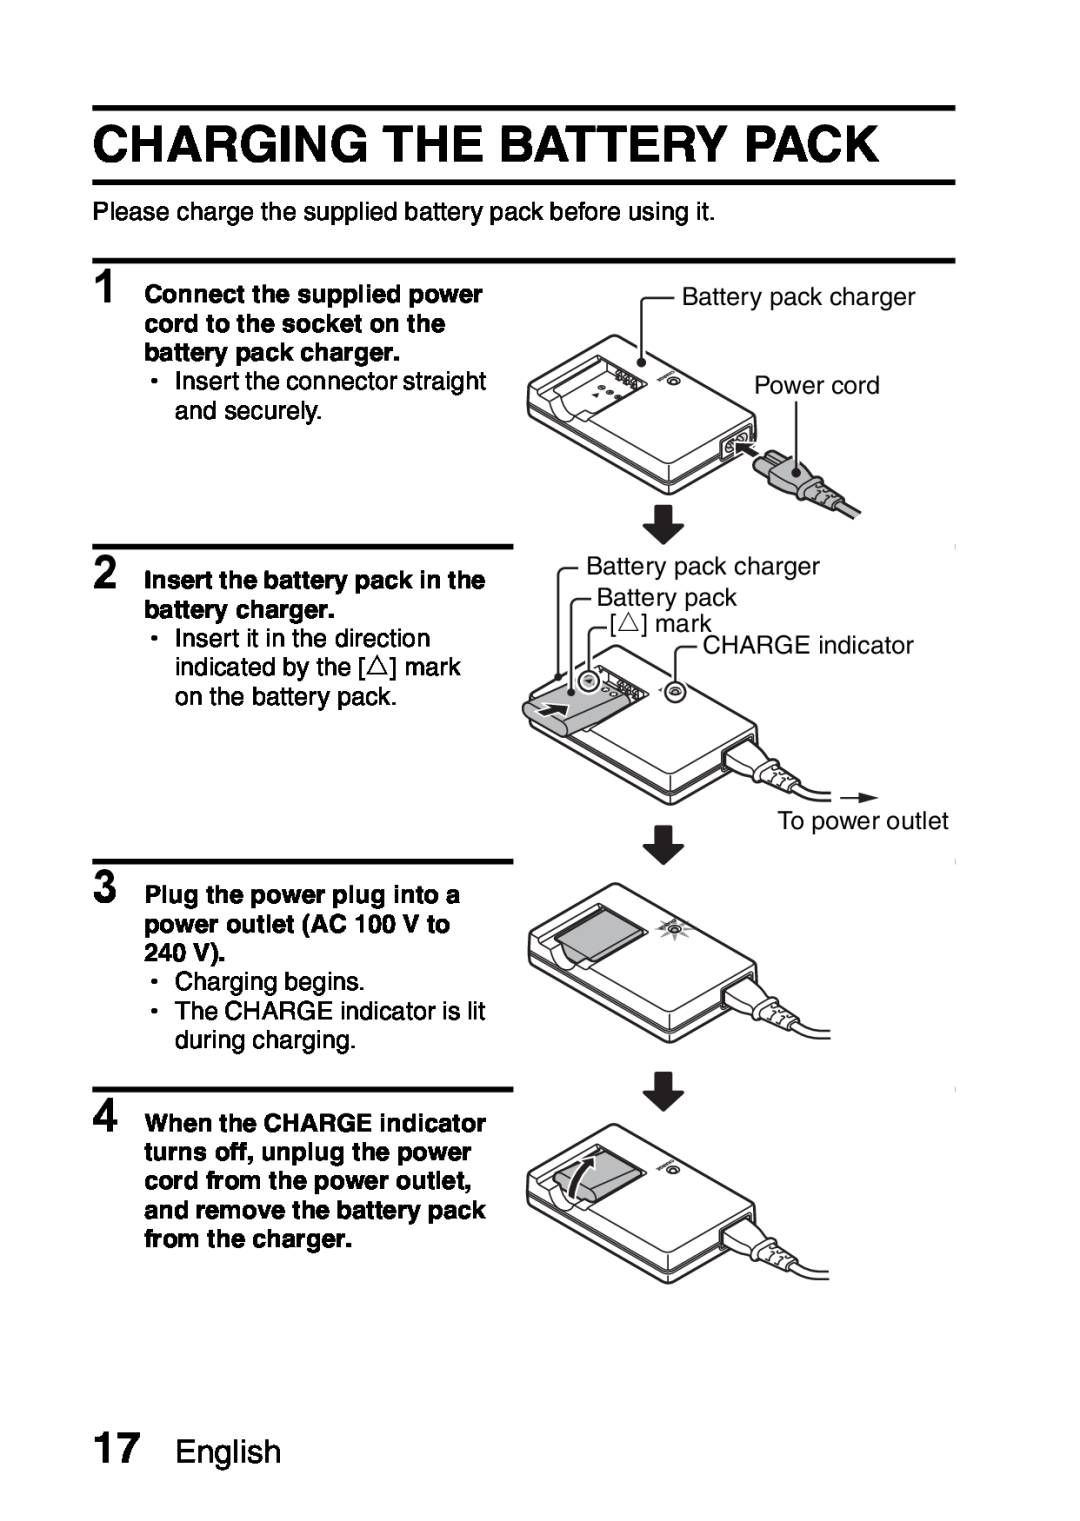 Samsung R50 instruction manual Charging The Battery Pack, English, Insert the battery pack in the battery charger 